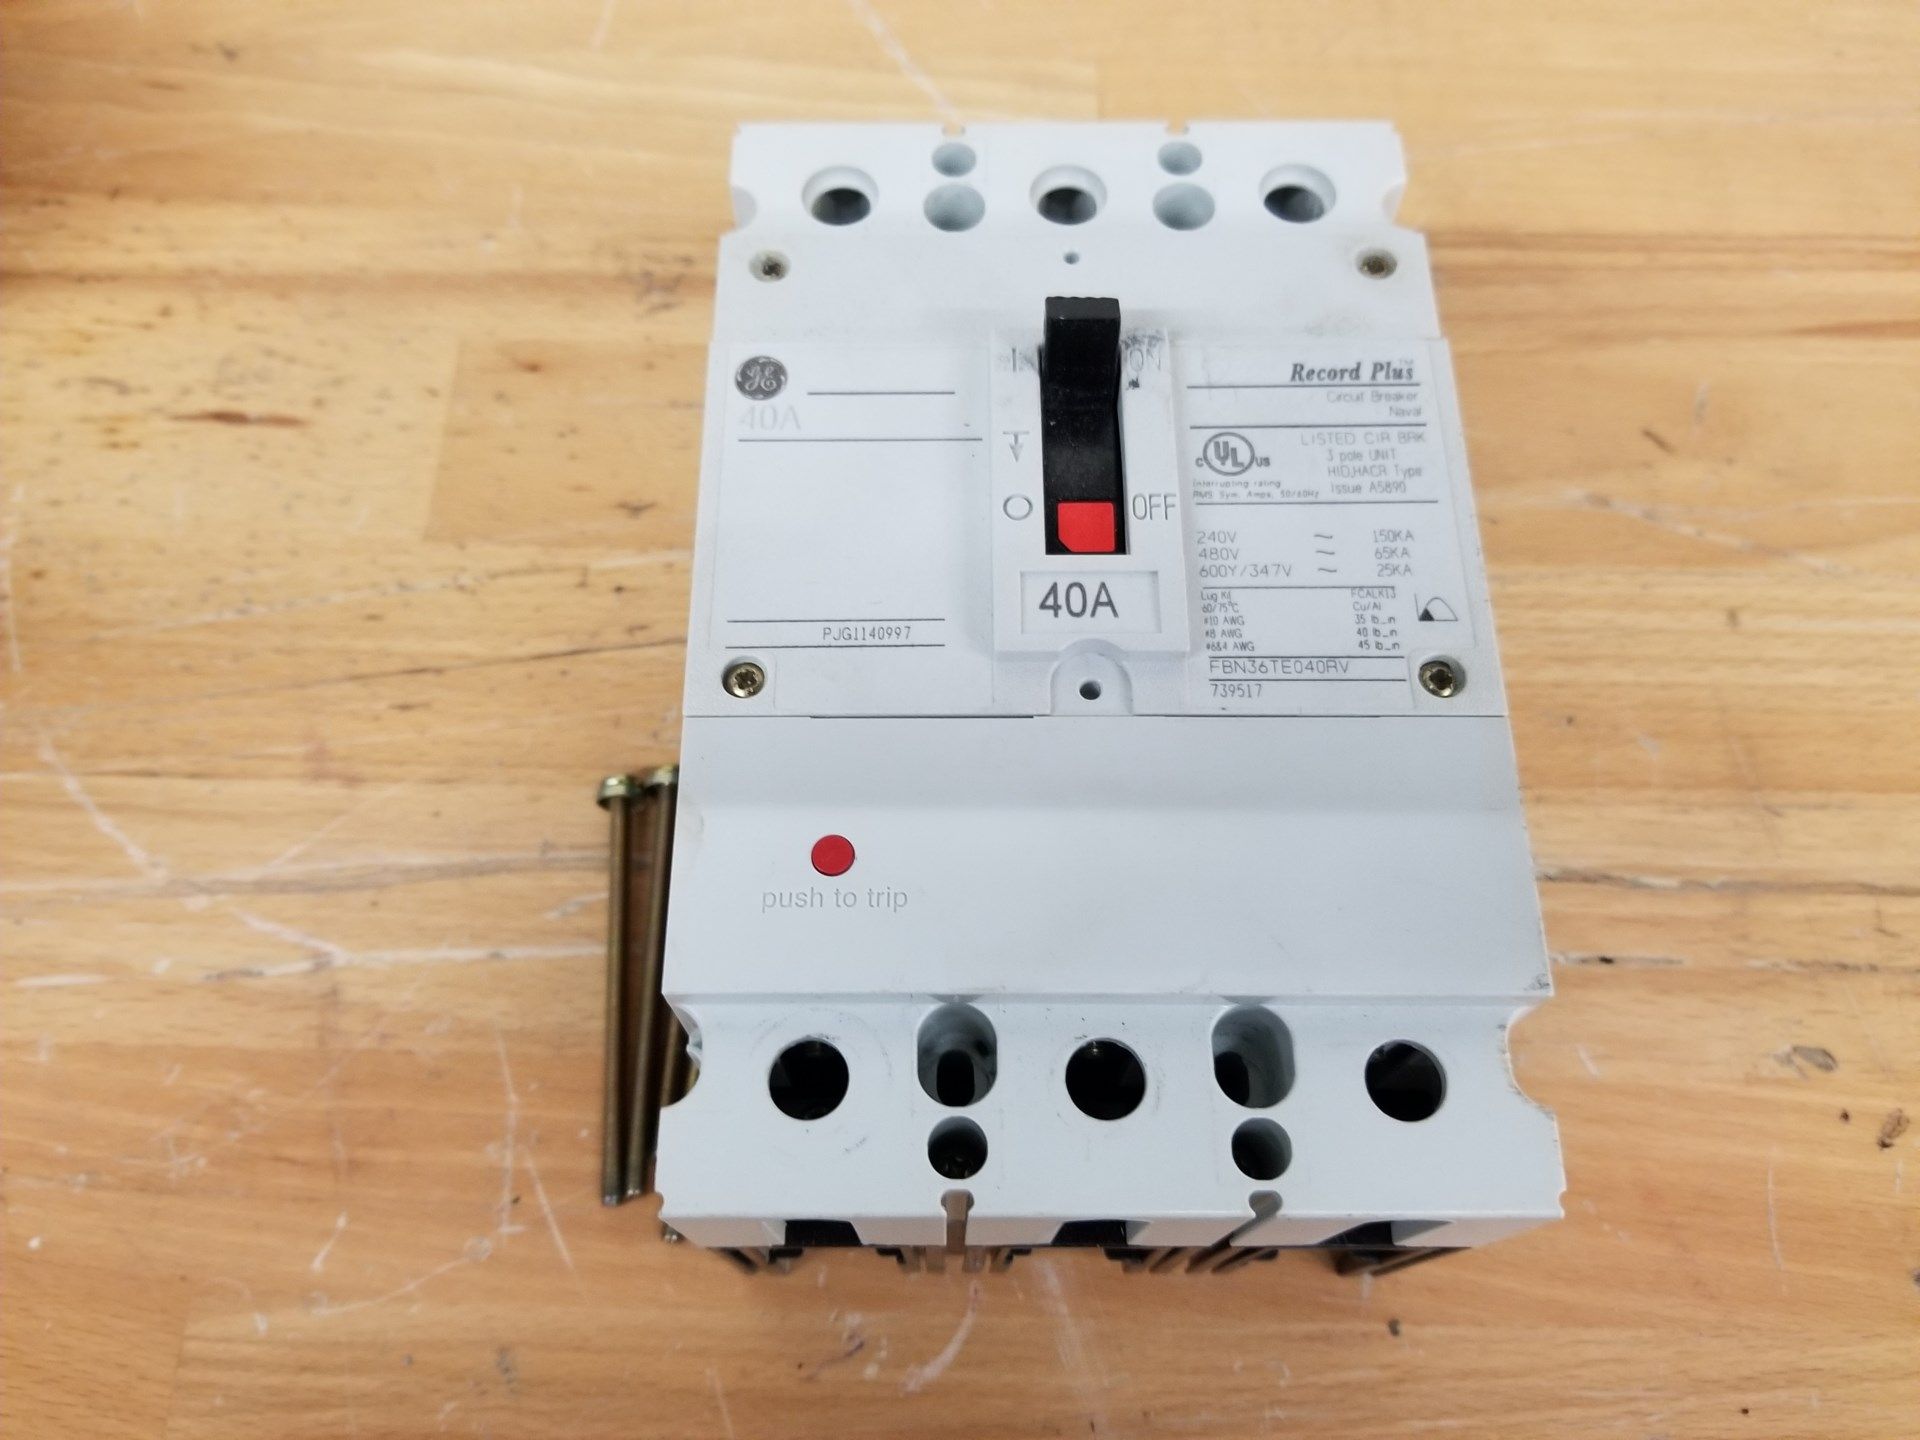 GE RECORD PLUS 40A MOLDED CASE CIRCUIT BREAKER